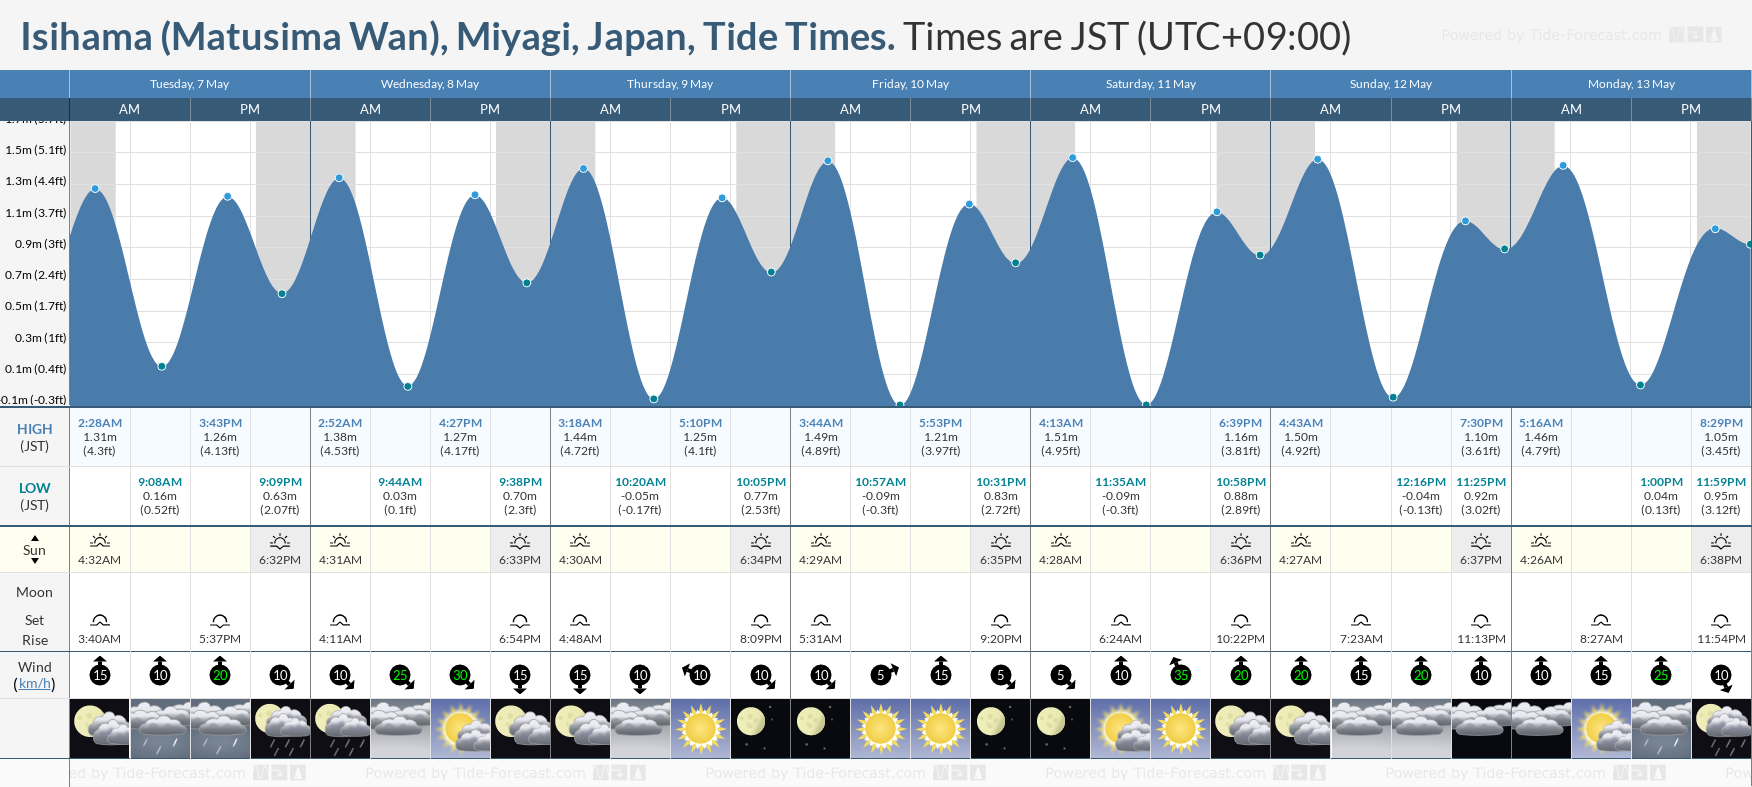 Isihama (Matusima Wan), Miyagi, Japan Tide Chart including high and low tide tide times for the next 7 days